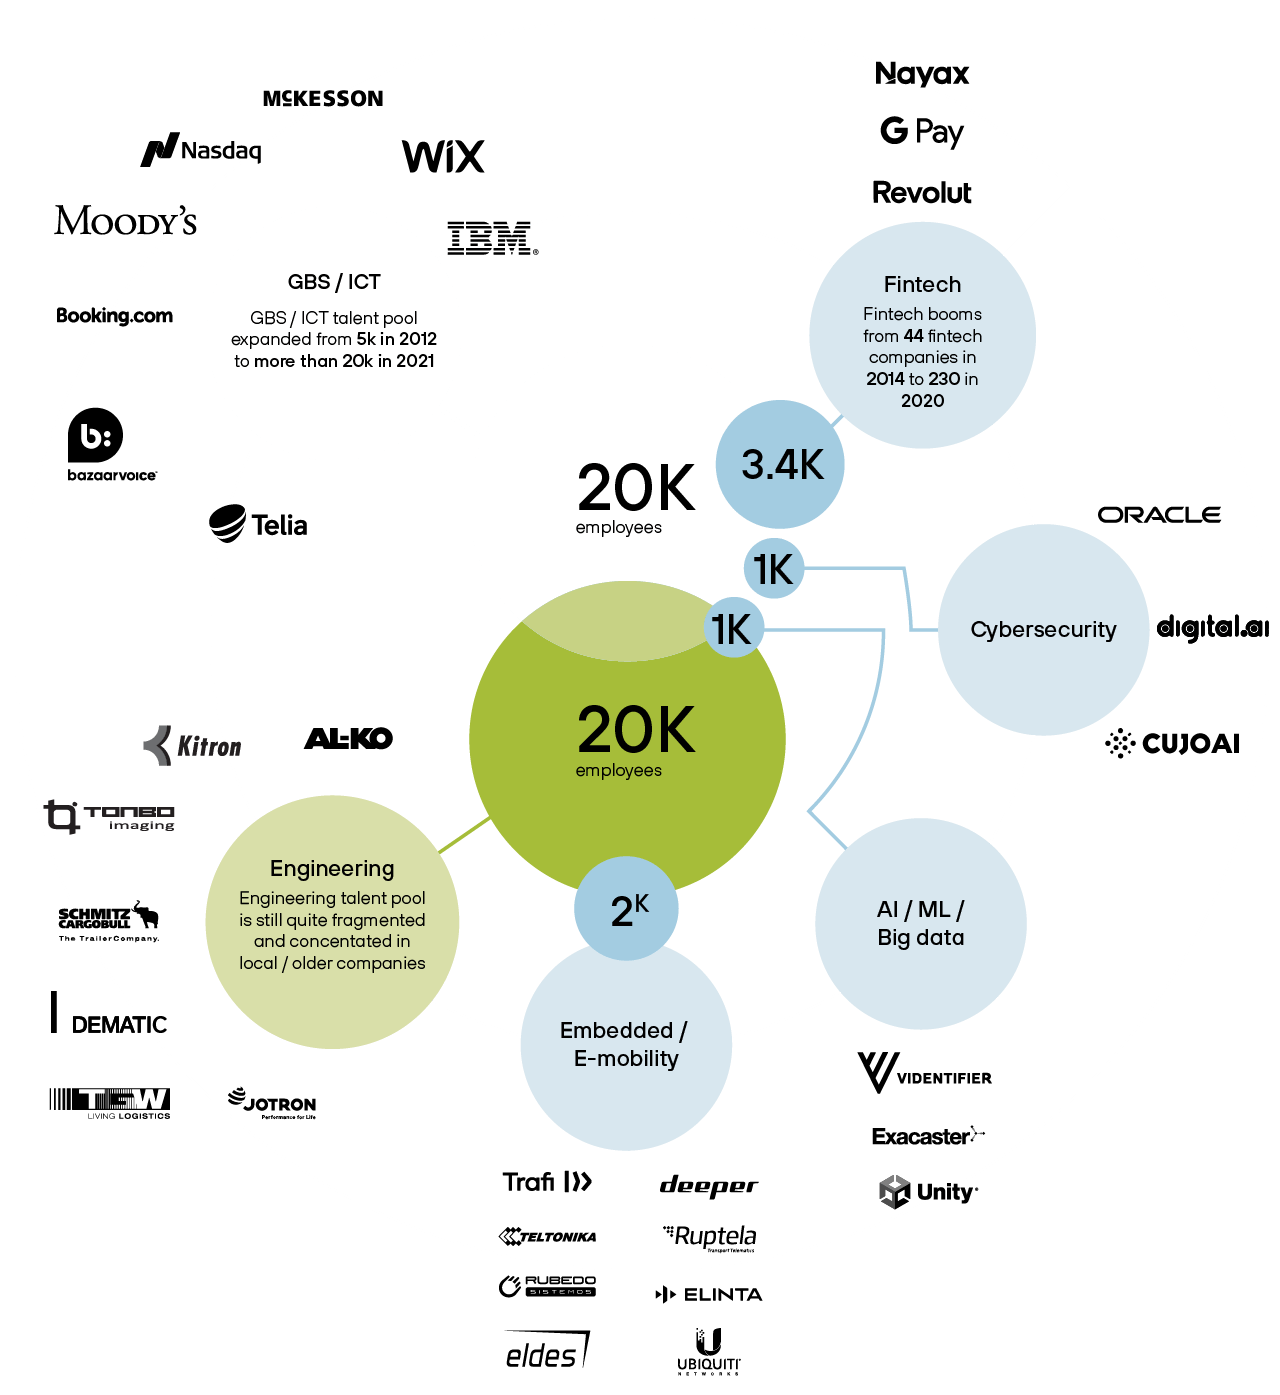 Digital Ecosystem in Lithuania